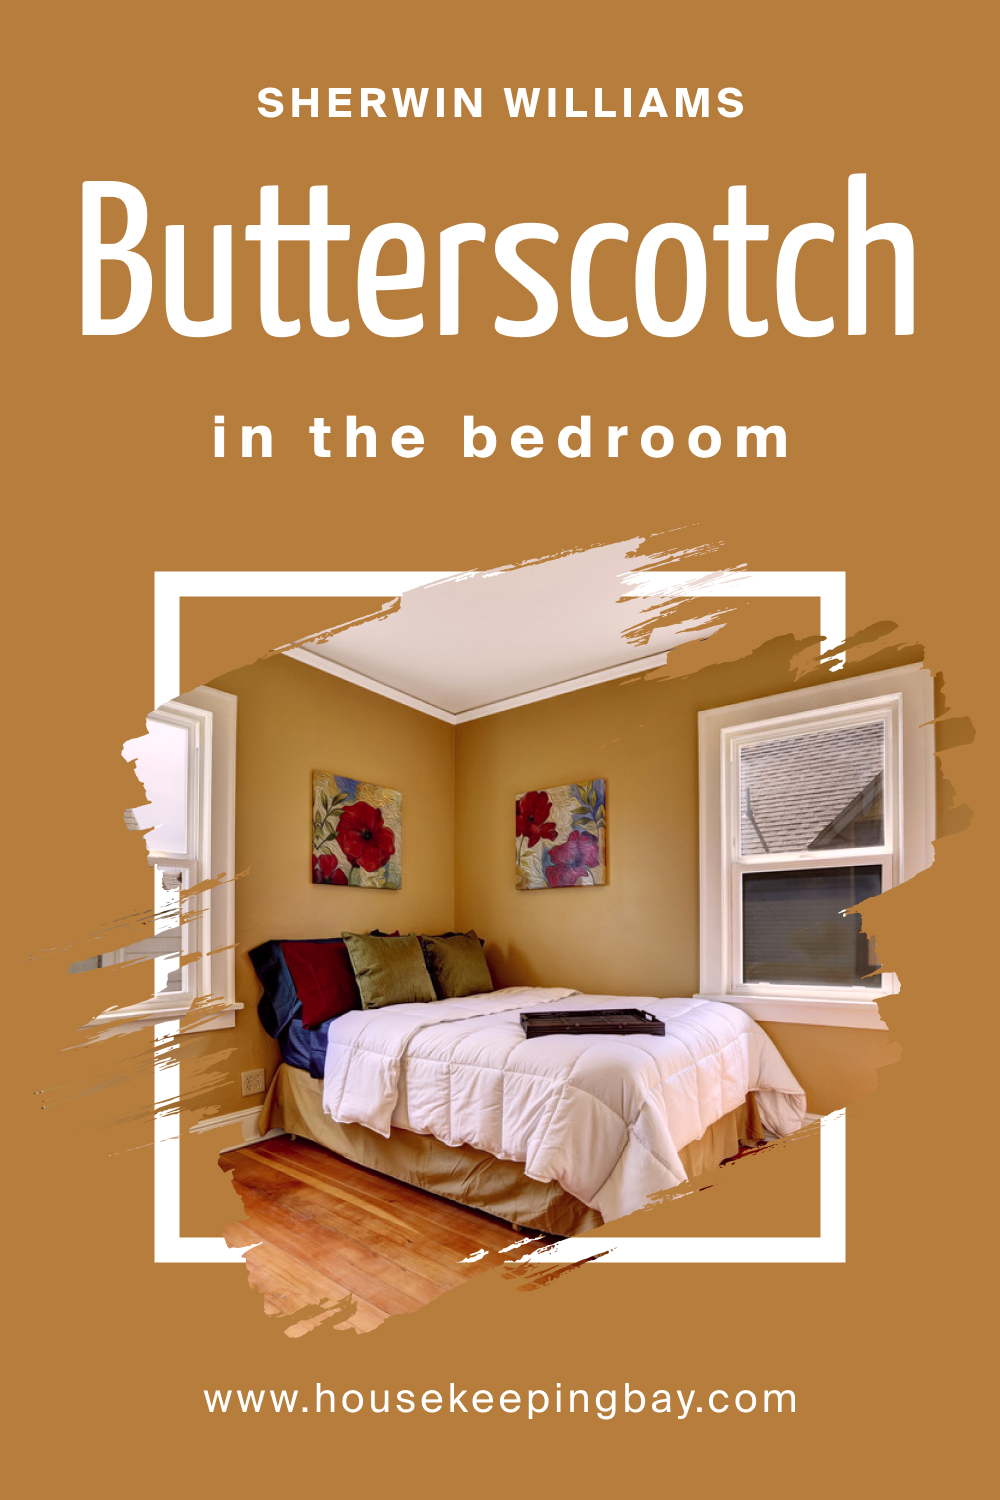 Sherwin Williams. SW 6377 Butterscotch For the bedroom